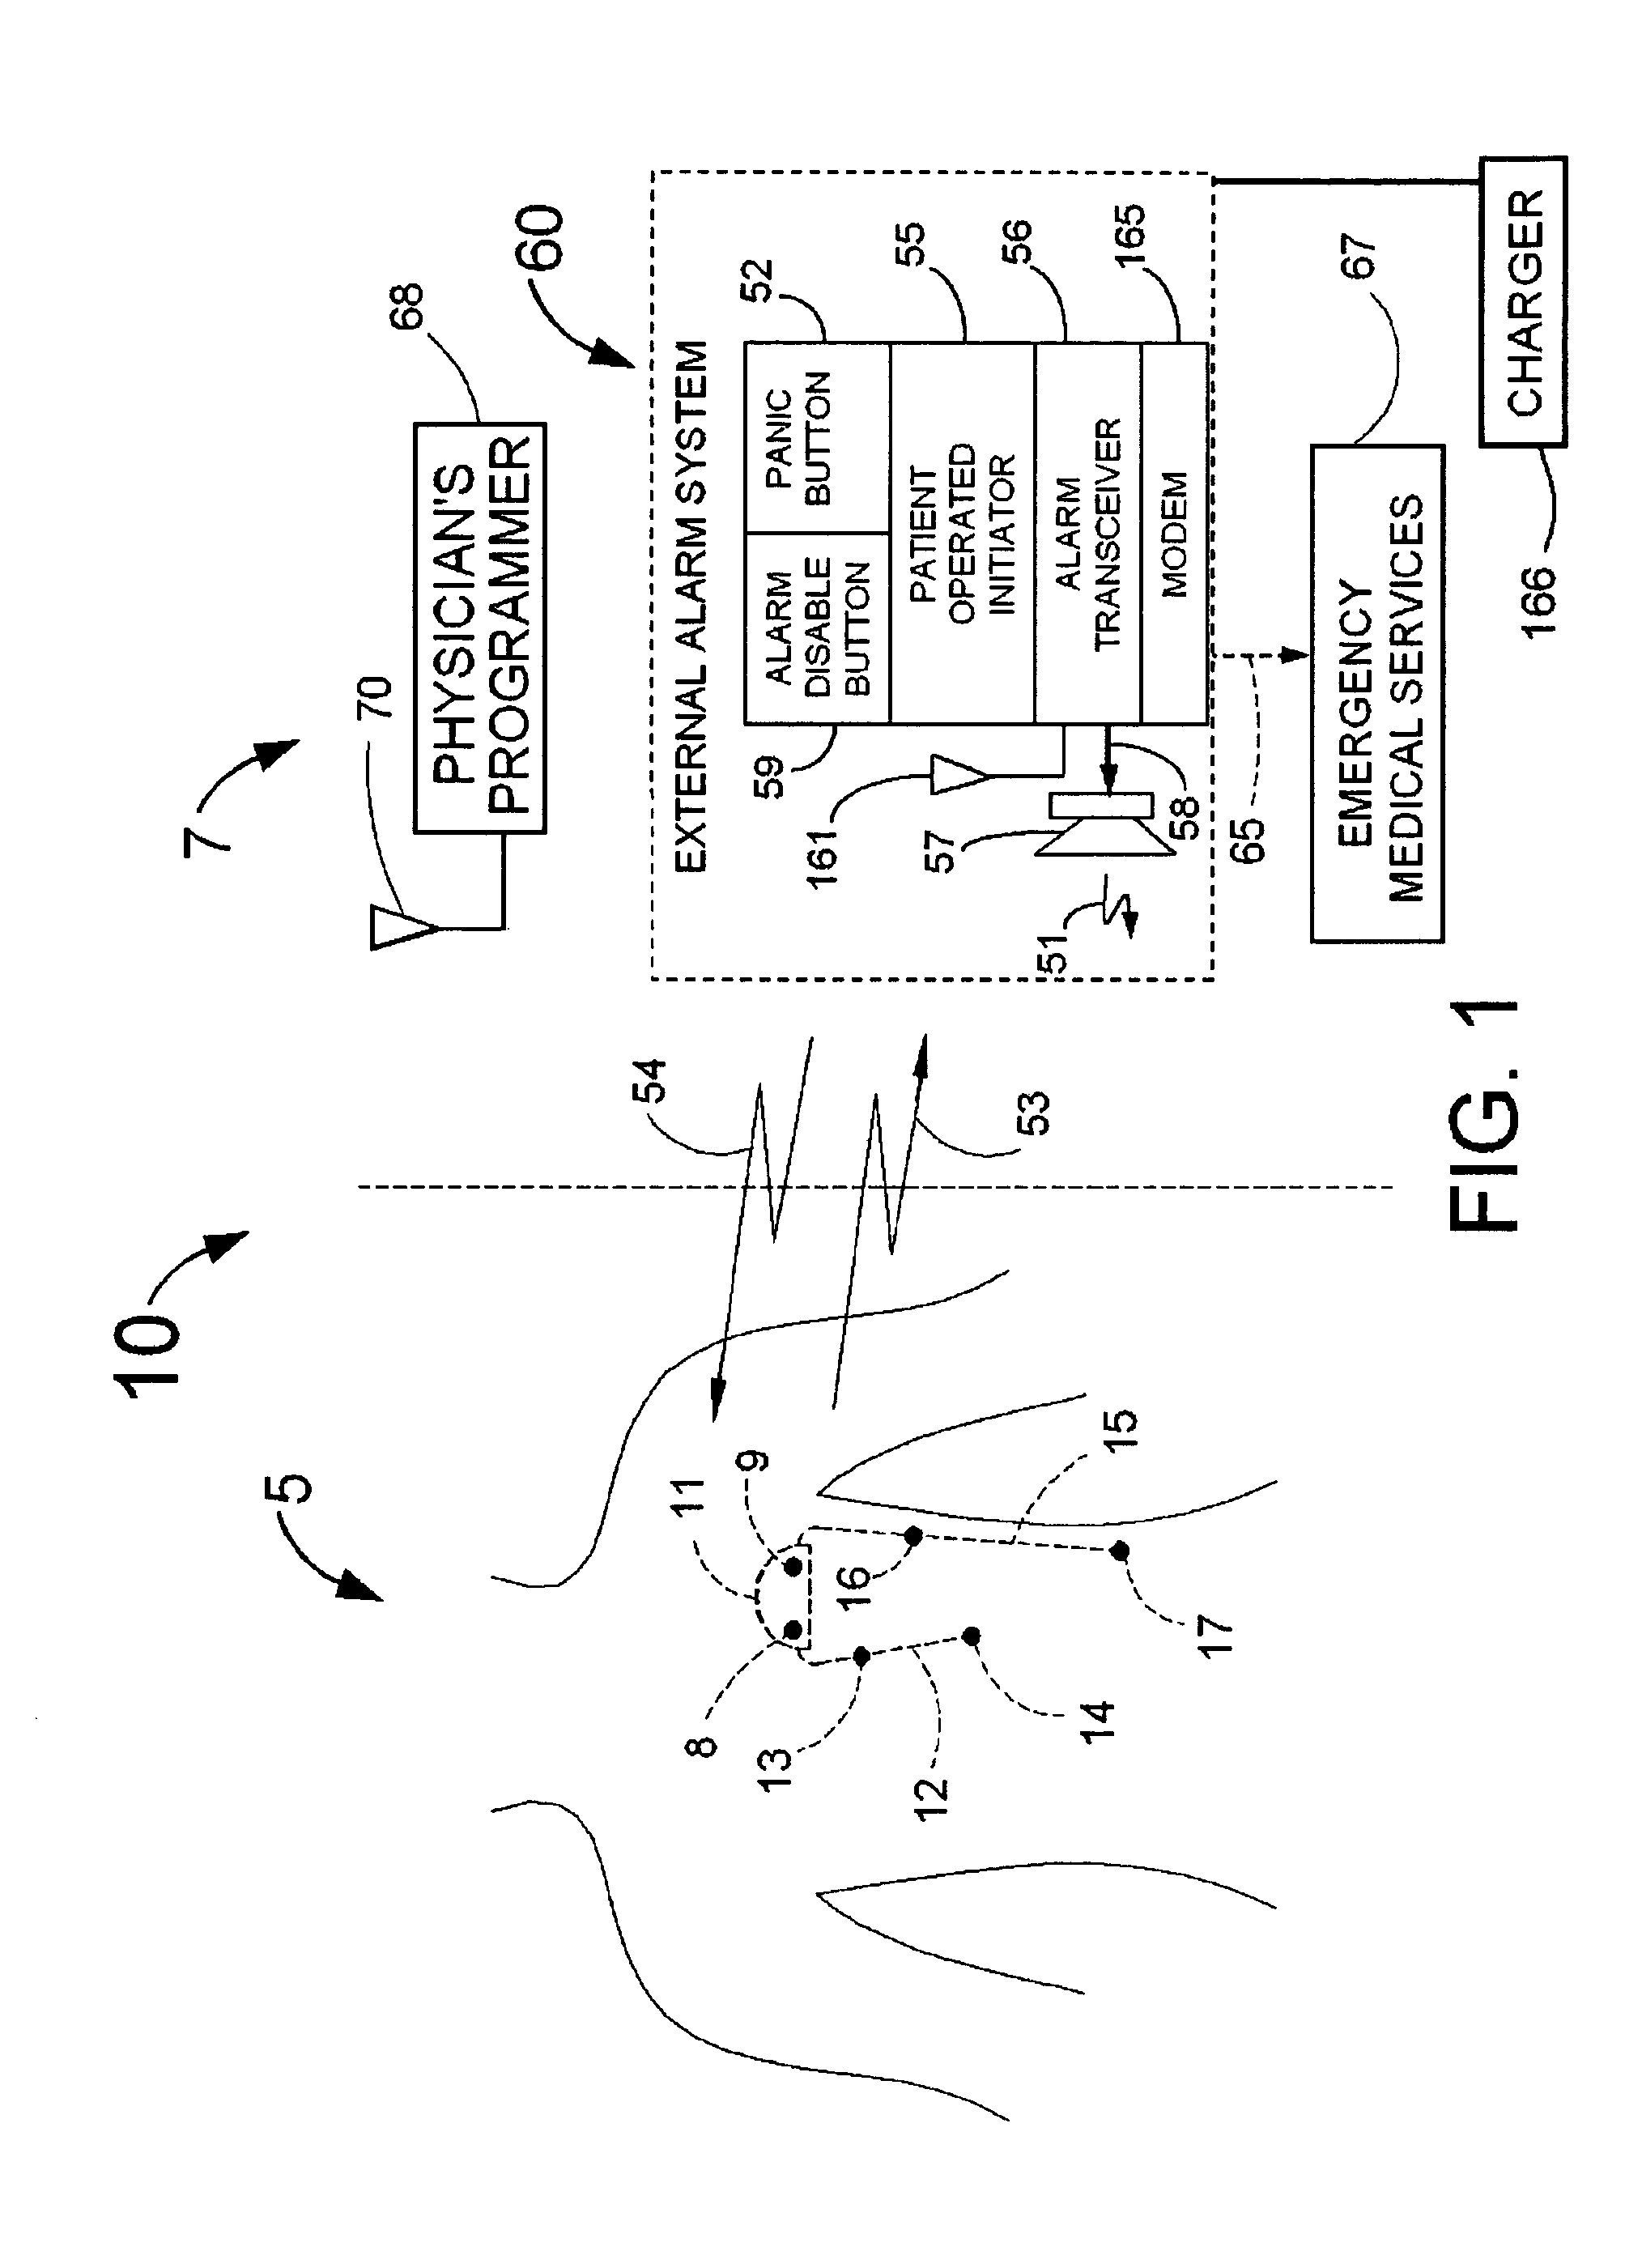 System for the detection of cardiac events